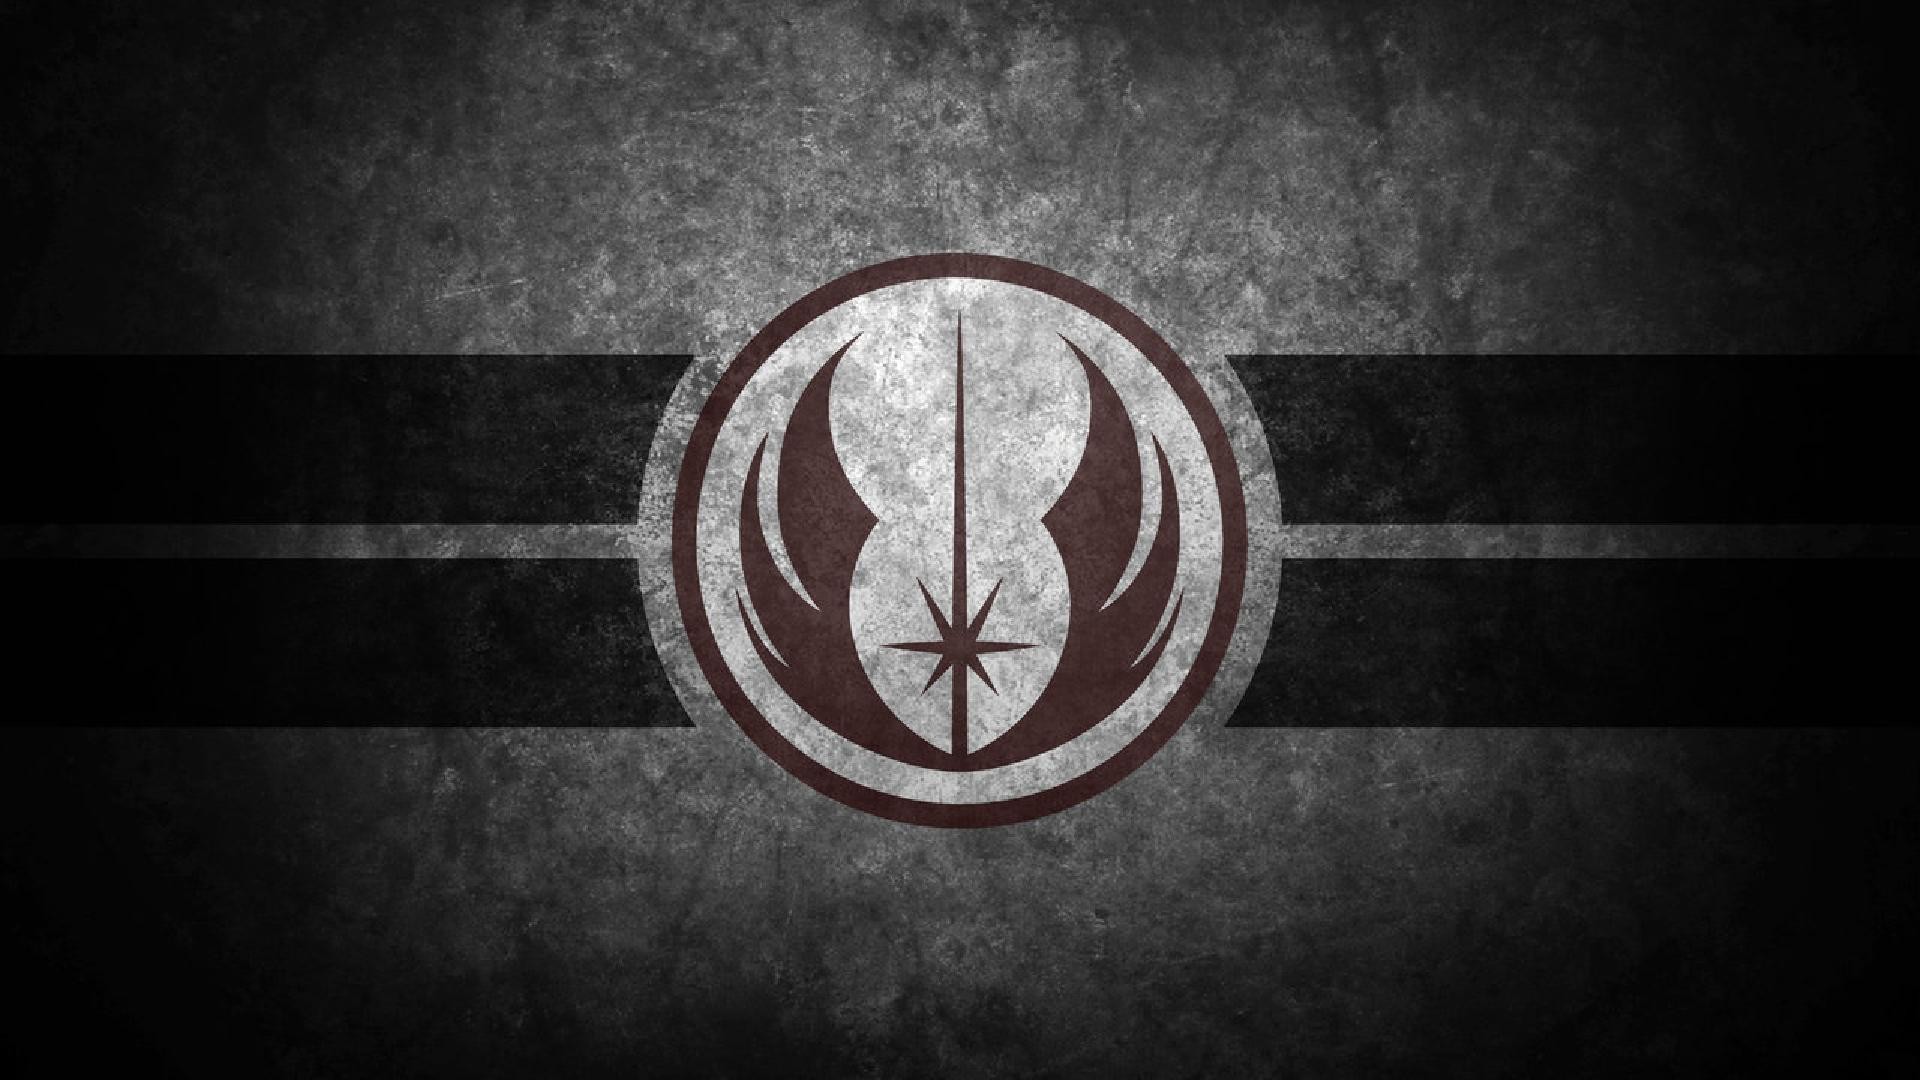 The Jedi Order, later known as the Old Jedi Order and referred to as the Holy Order of the Jedi Knights, was an ancient monastic peacekeeping organization